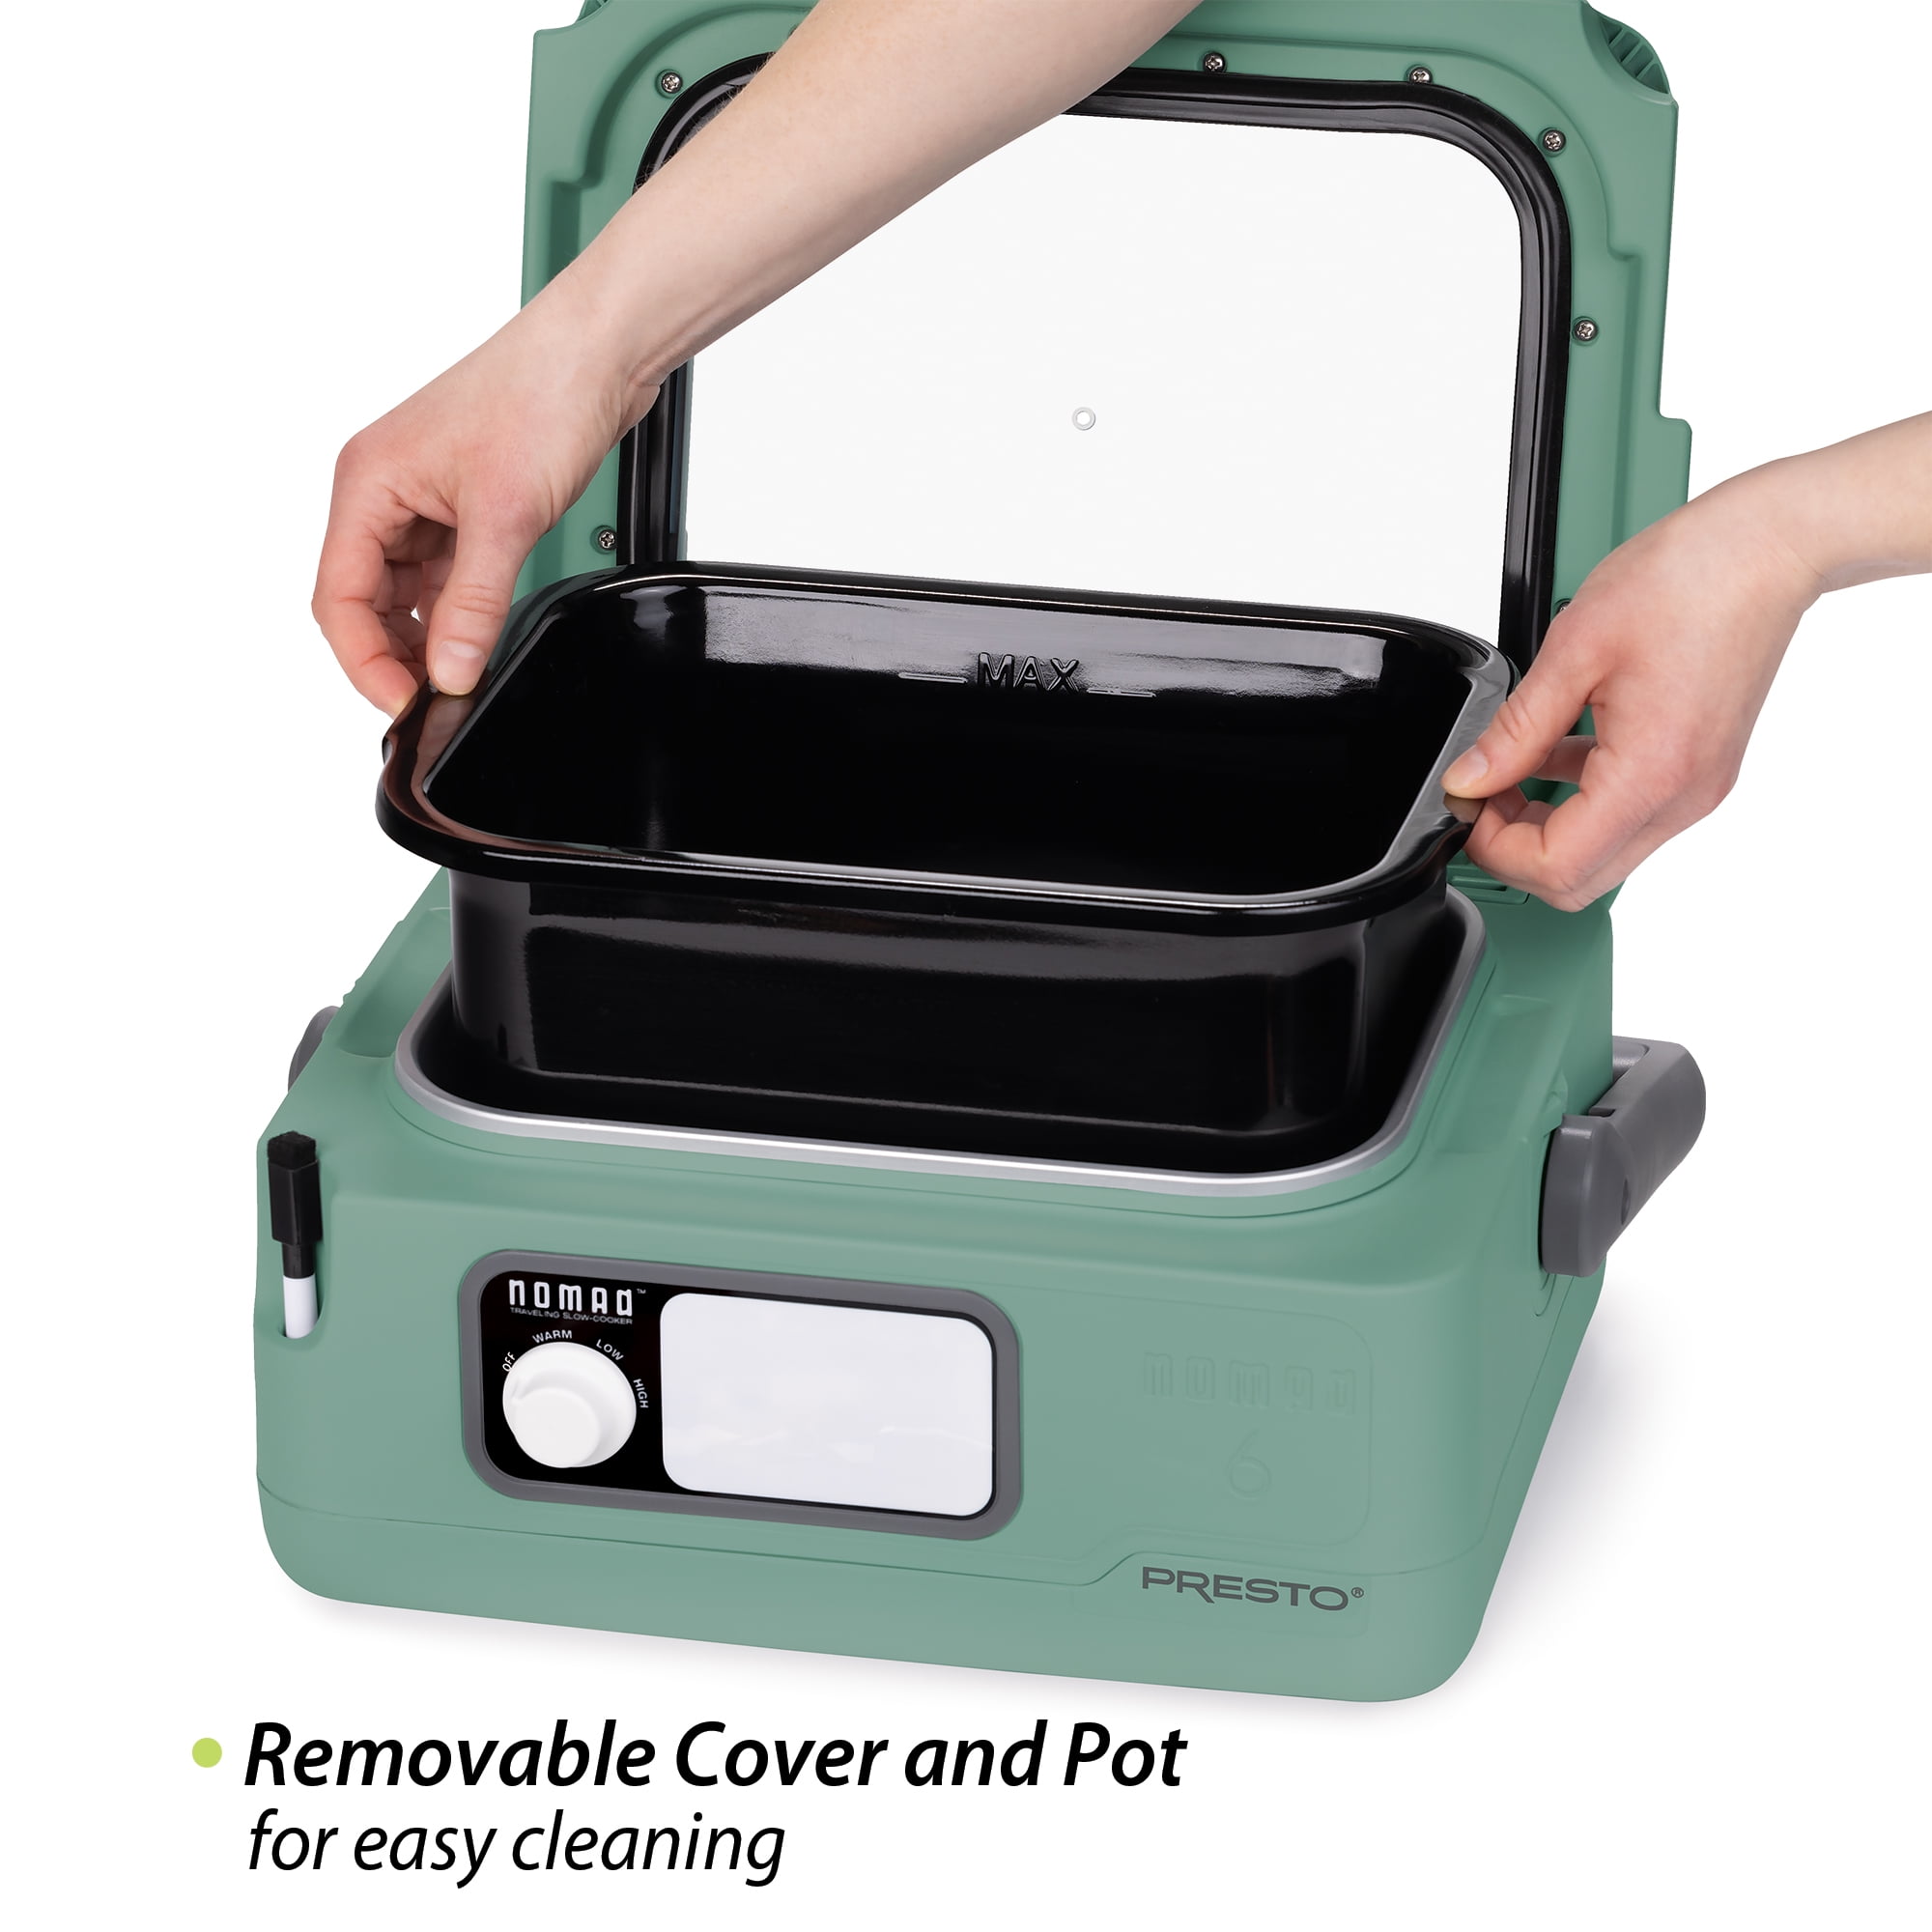 Portable Travel Slow Cooker